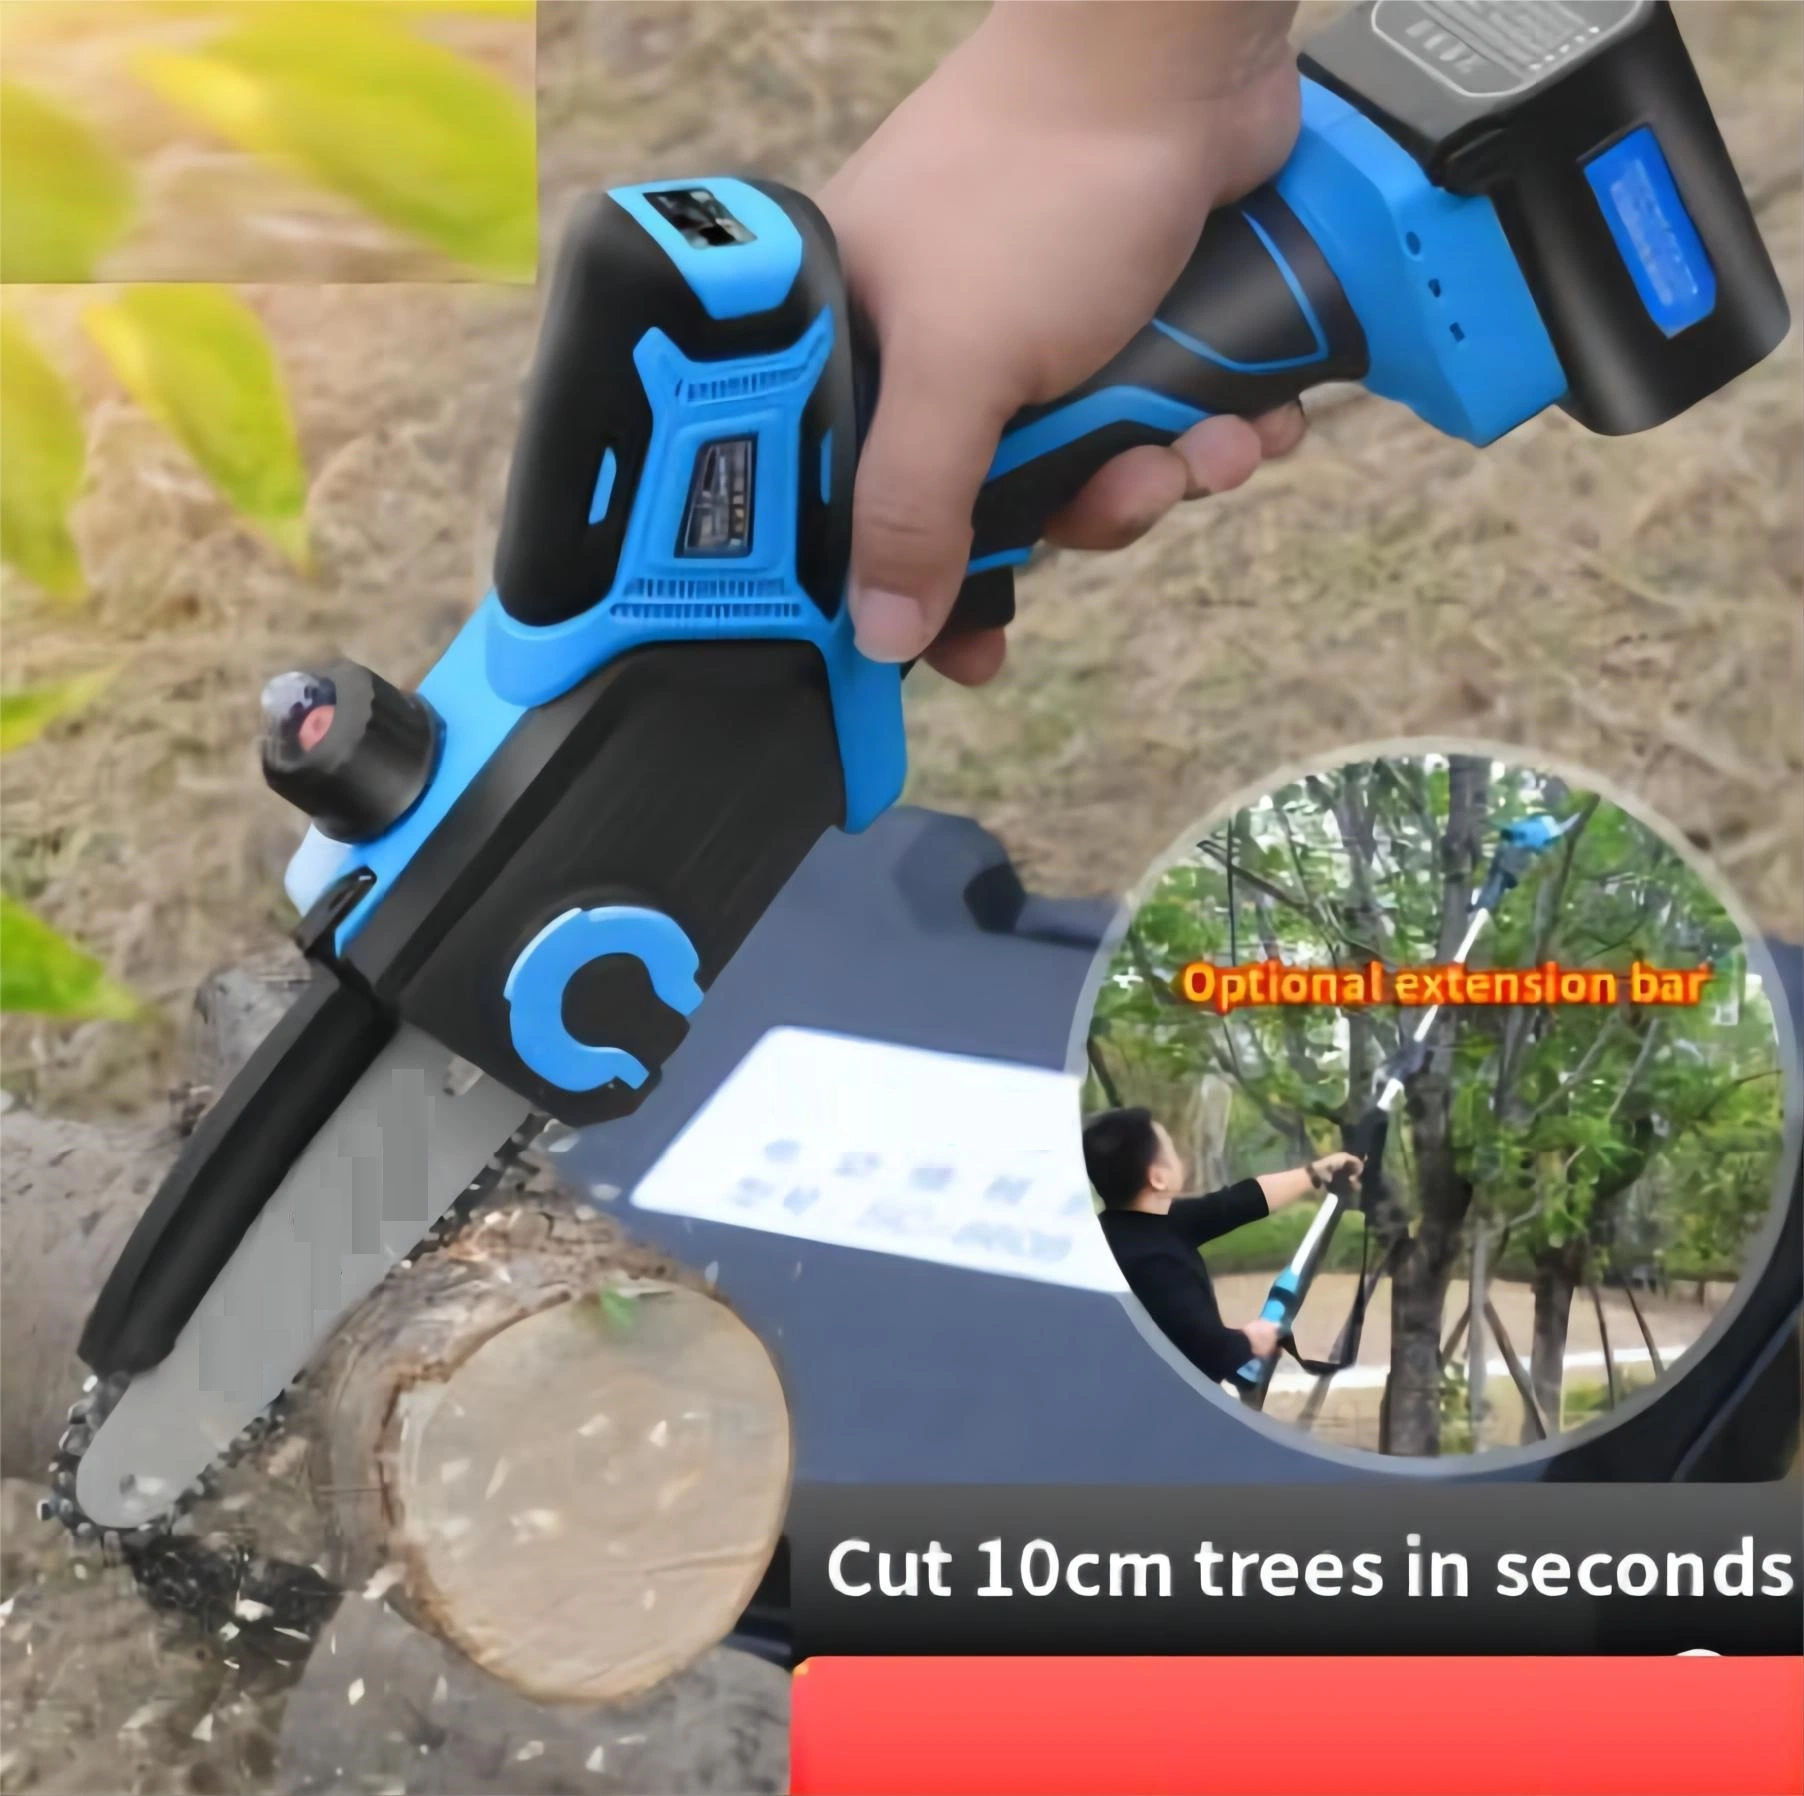 10% off-Unique-Design New Product-Li-ion Battery-Cordless/Electric-2in1 Multi-Garden Power Tool Set-Short/Long-Reach-Lopper/Chainsaw